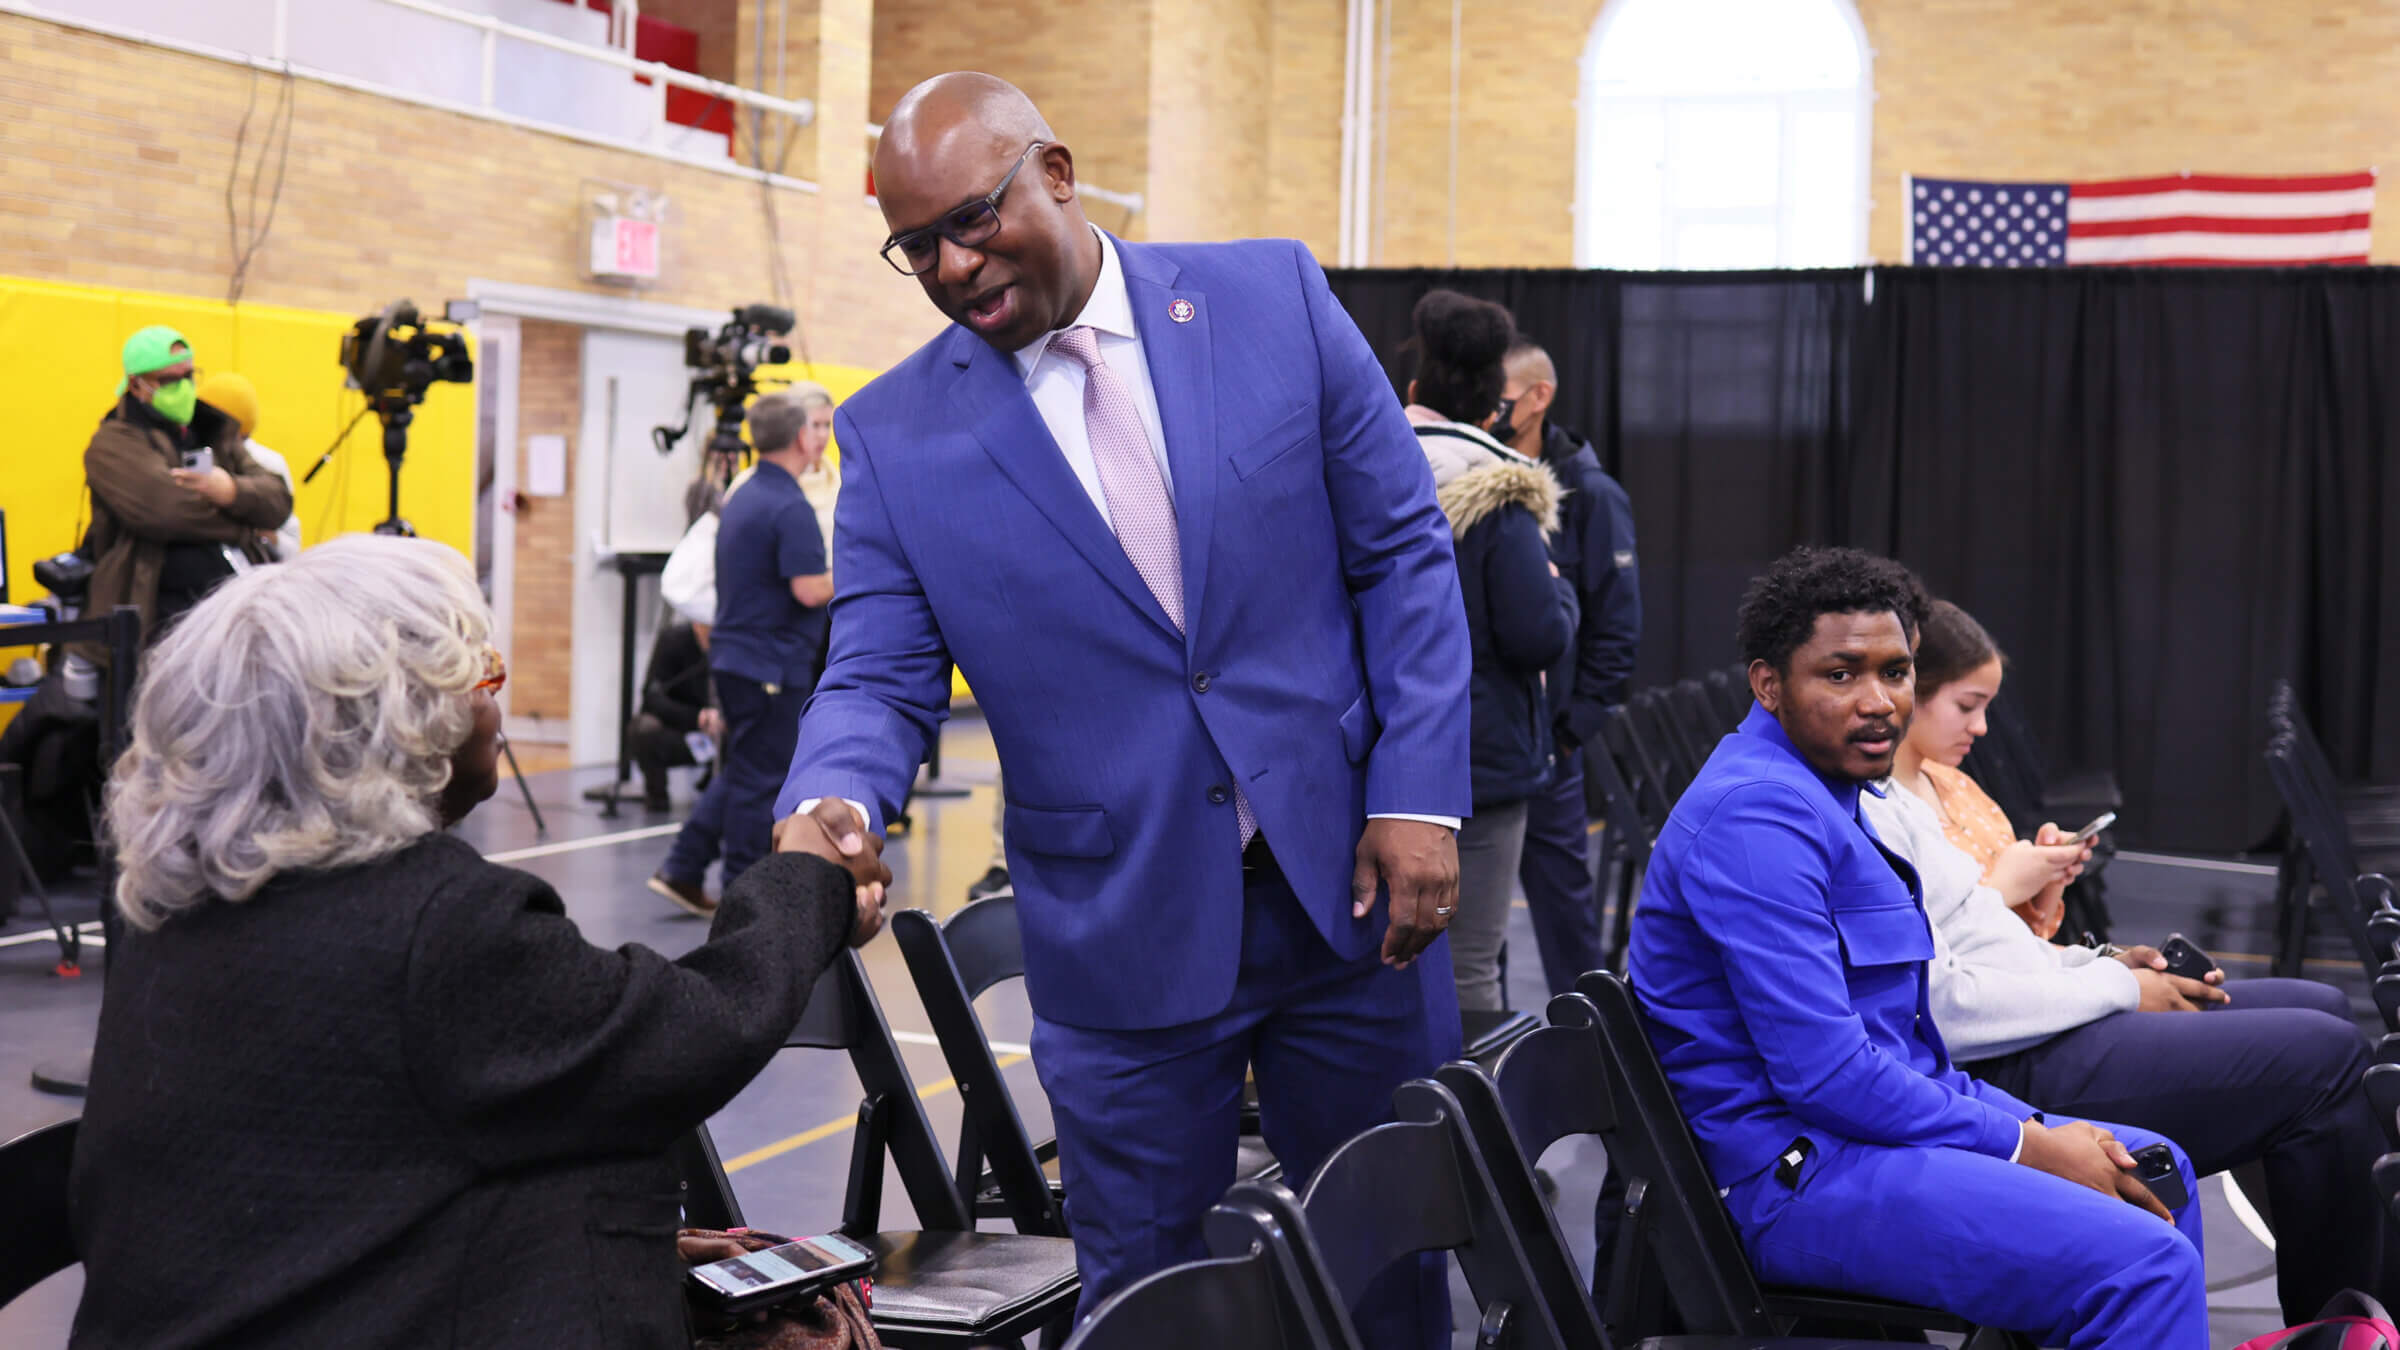 Rep. Jamaal Bowman, D-NY, visits with constituents during a town hall meeting at College of Mount Saint Vincent in Riverdale, New York, last year. Bowman is gathering signatures for a letter calling on the White House to encourage universities to respond to campus hate incidents through education.